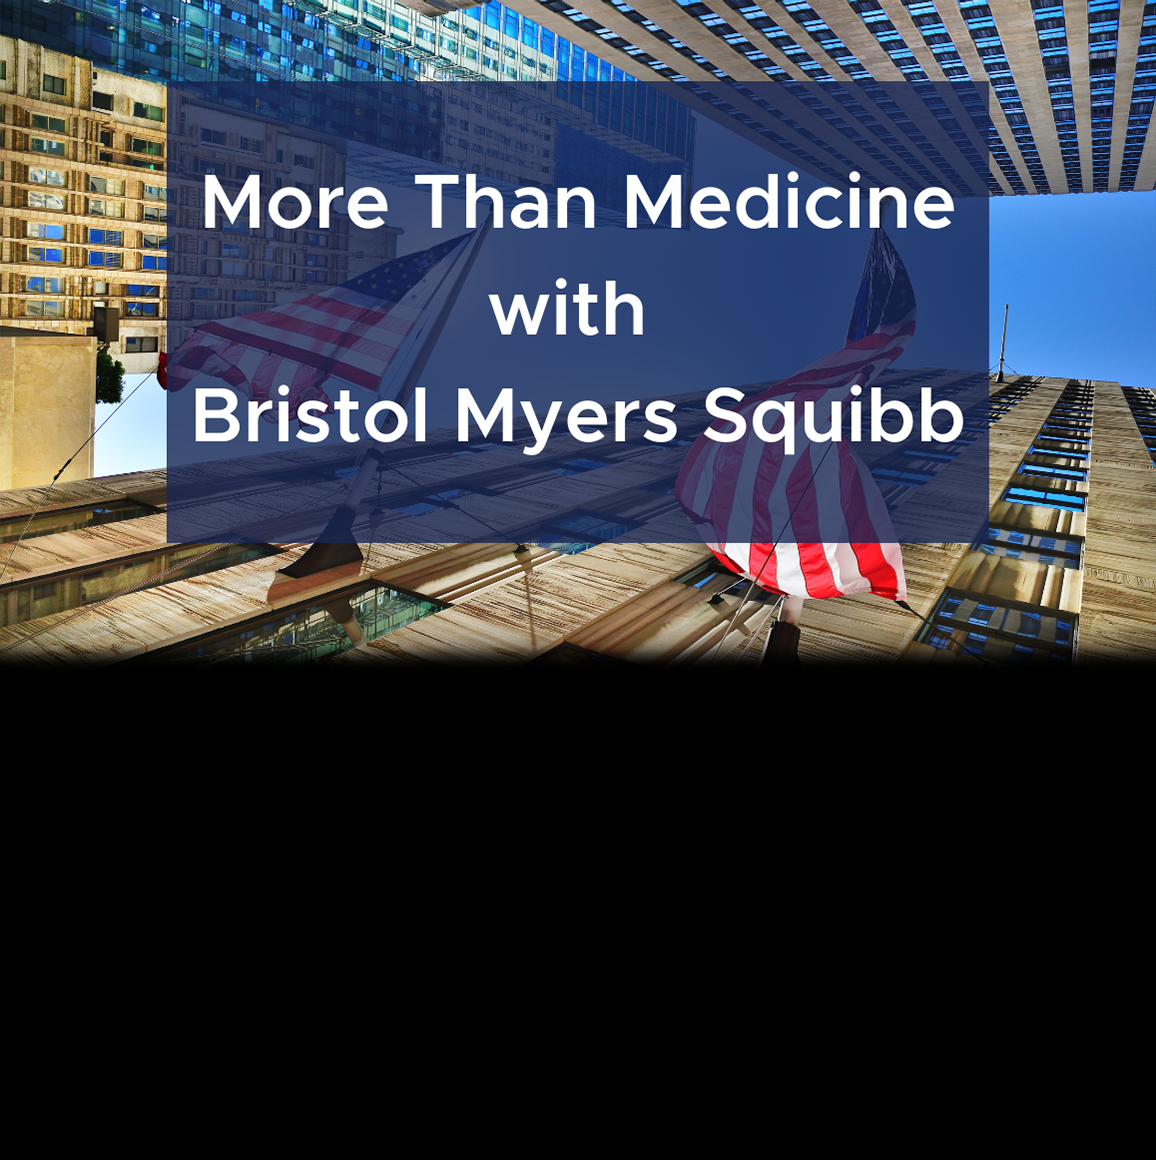 More Than Medicine with Bristol Meyers Squibb